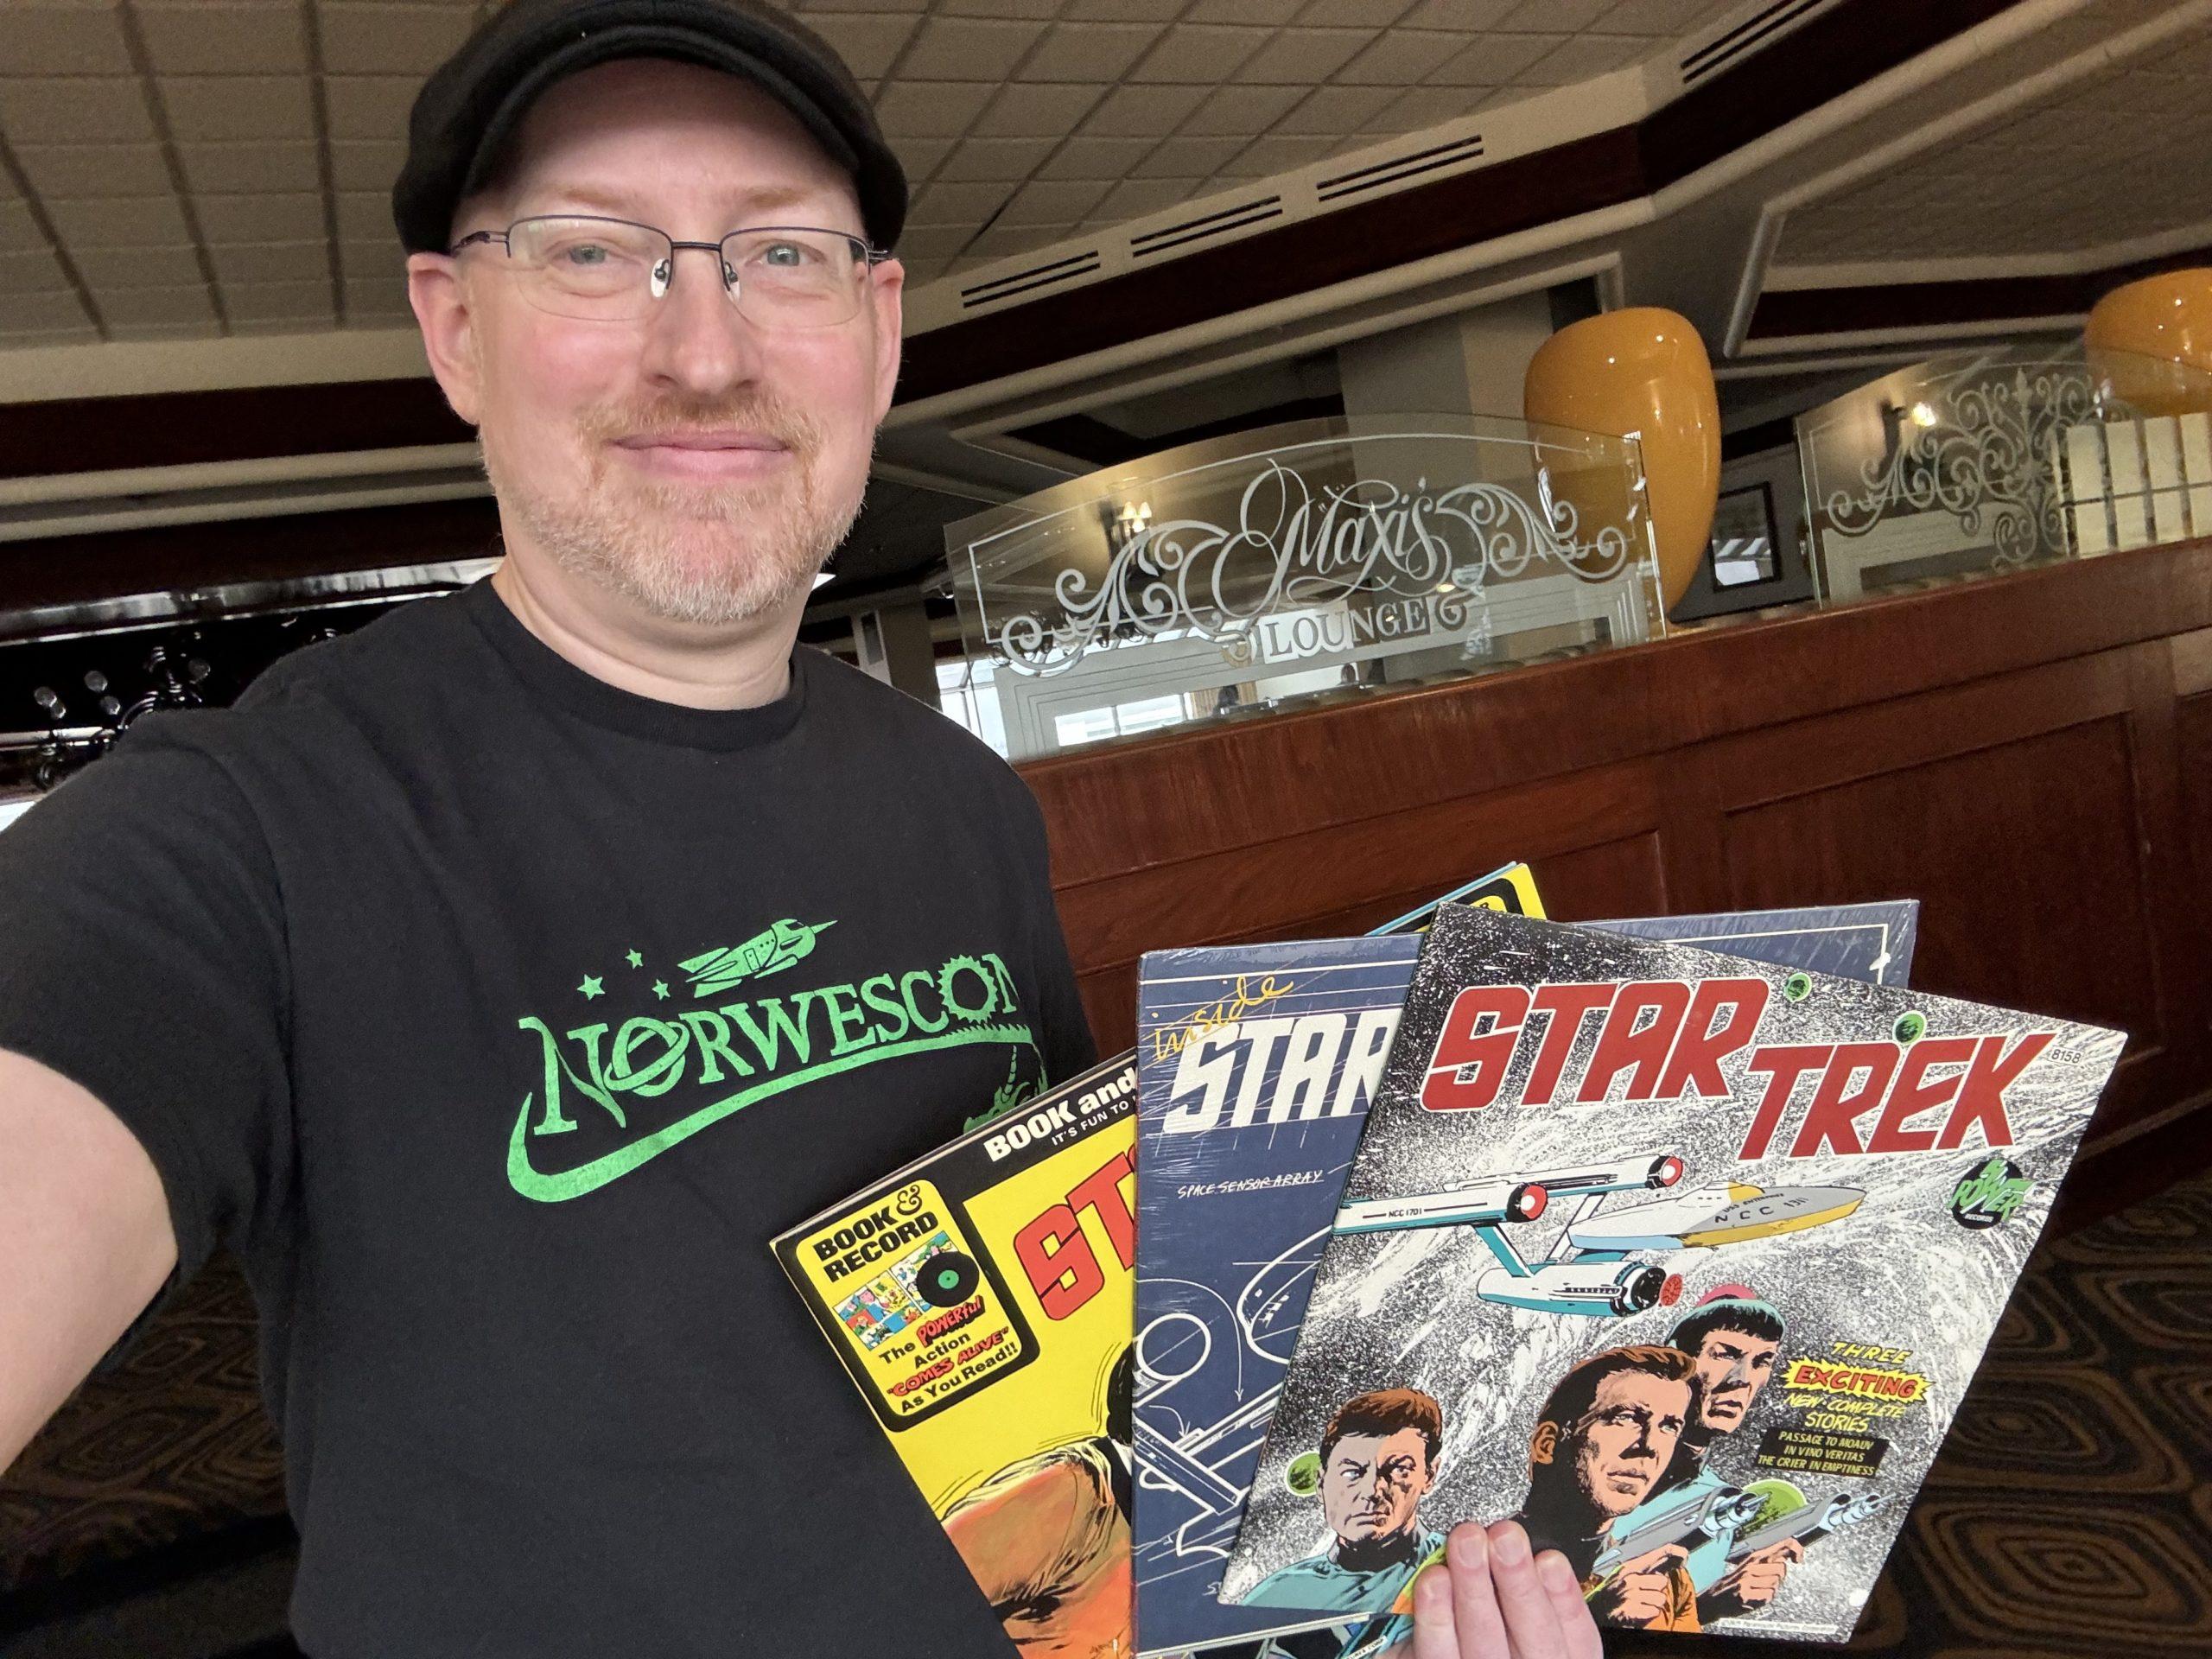 Me wearing a black t-shirt with the Norwescon logo in green, standing in Maxi's Lounge at the DoubleTree hotel, holding three old Star Trek LPs.